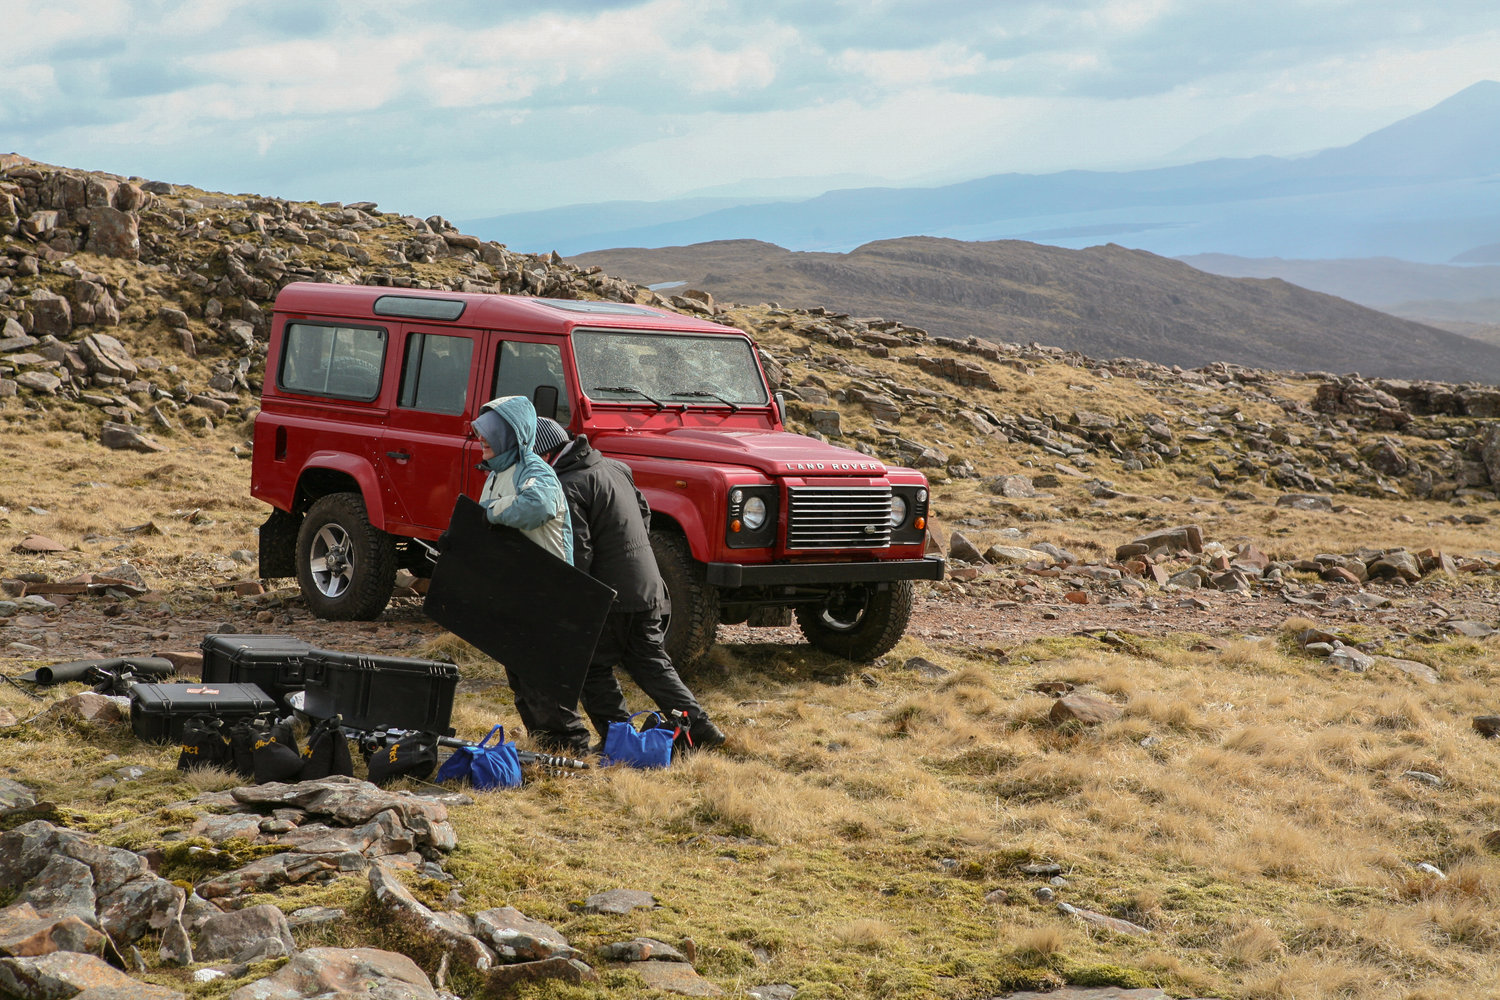 Landrover Defender Advertising Campaign - Photographic Production by Luke Jackson